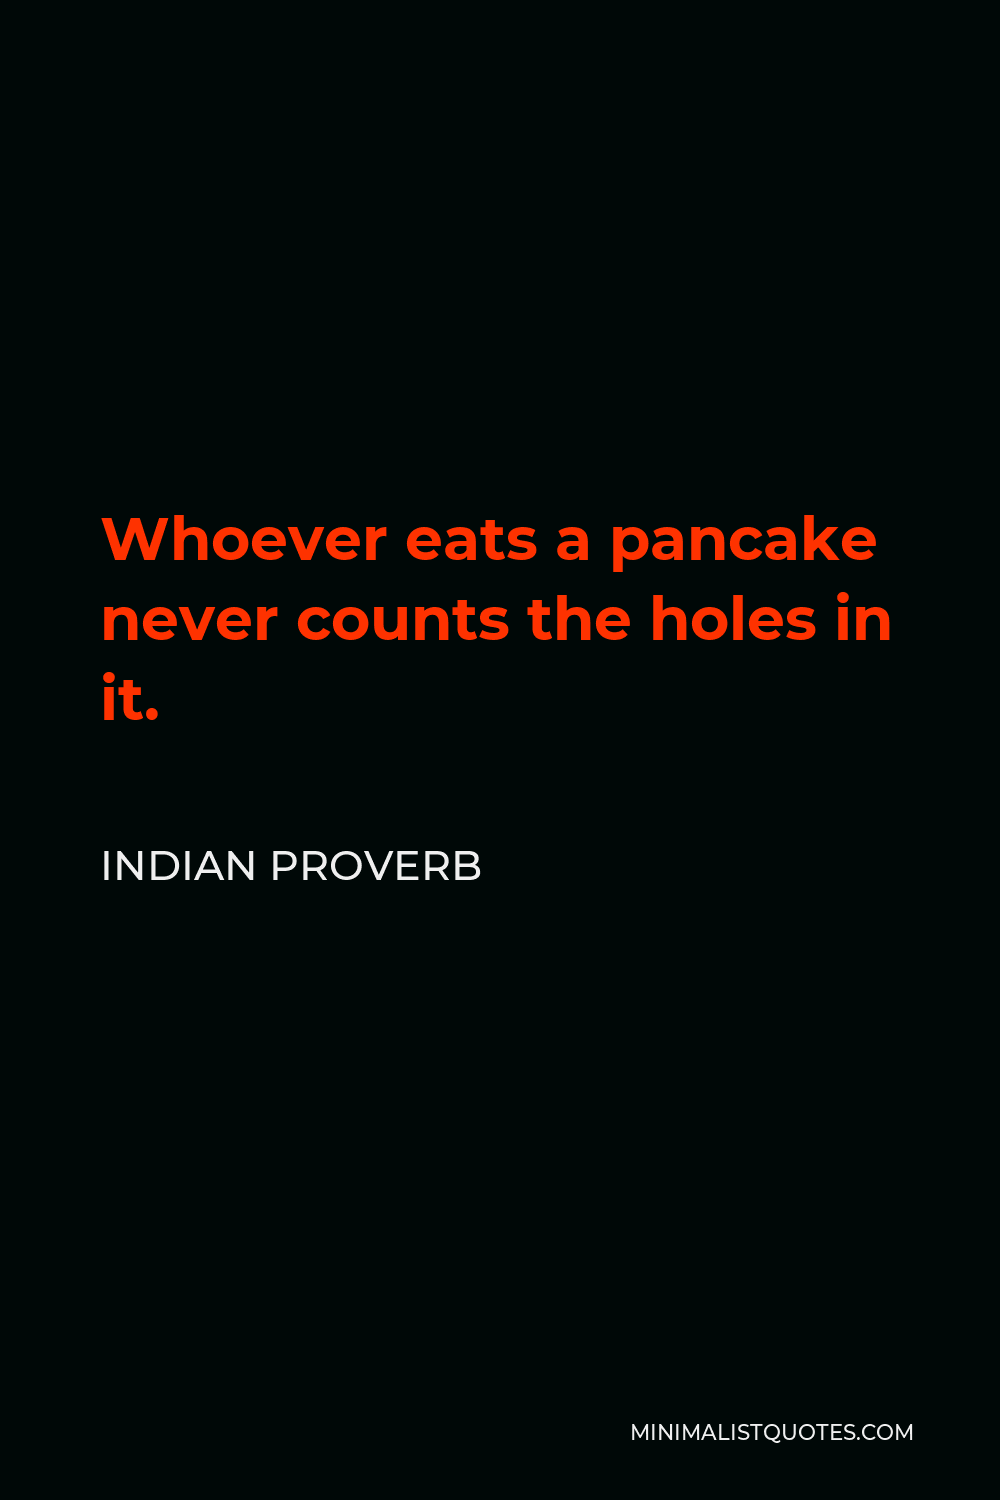 Indian Proverb Quote - Whoever eats a pancake never counts the holes in it.